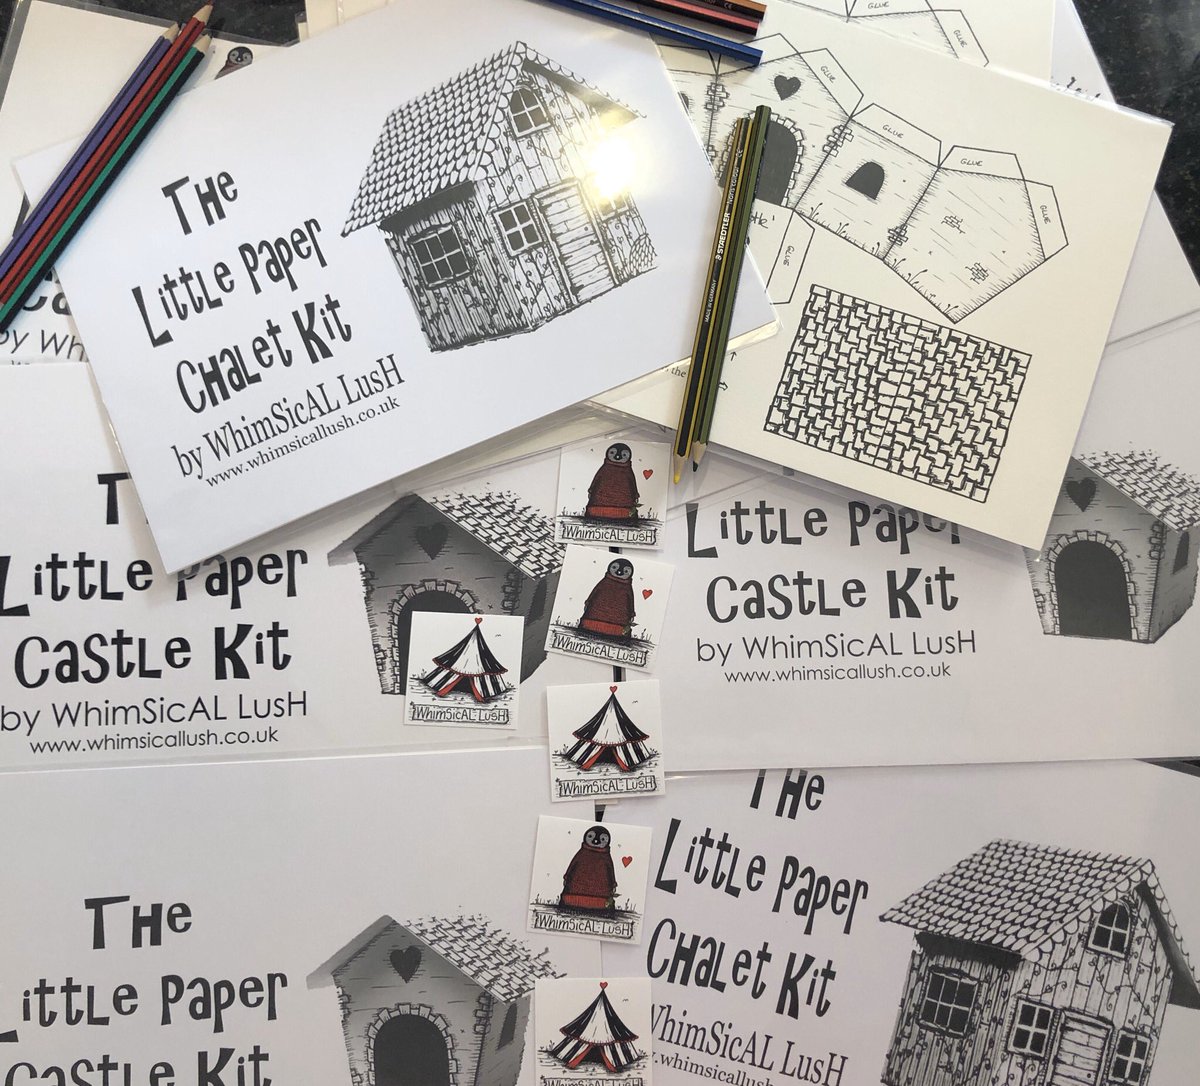 Thank you so much to @WhimSicALLusH ❤️🌈So excited to add these beautiful little paper castle kits to our parcels! #Dundee #CityOfDesign  #WhimsicalLush #PaperCraft  #TheKindnessWave #CovidKindness #ThankYou